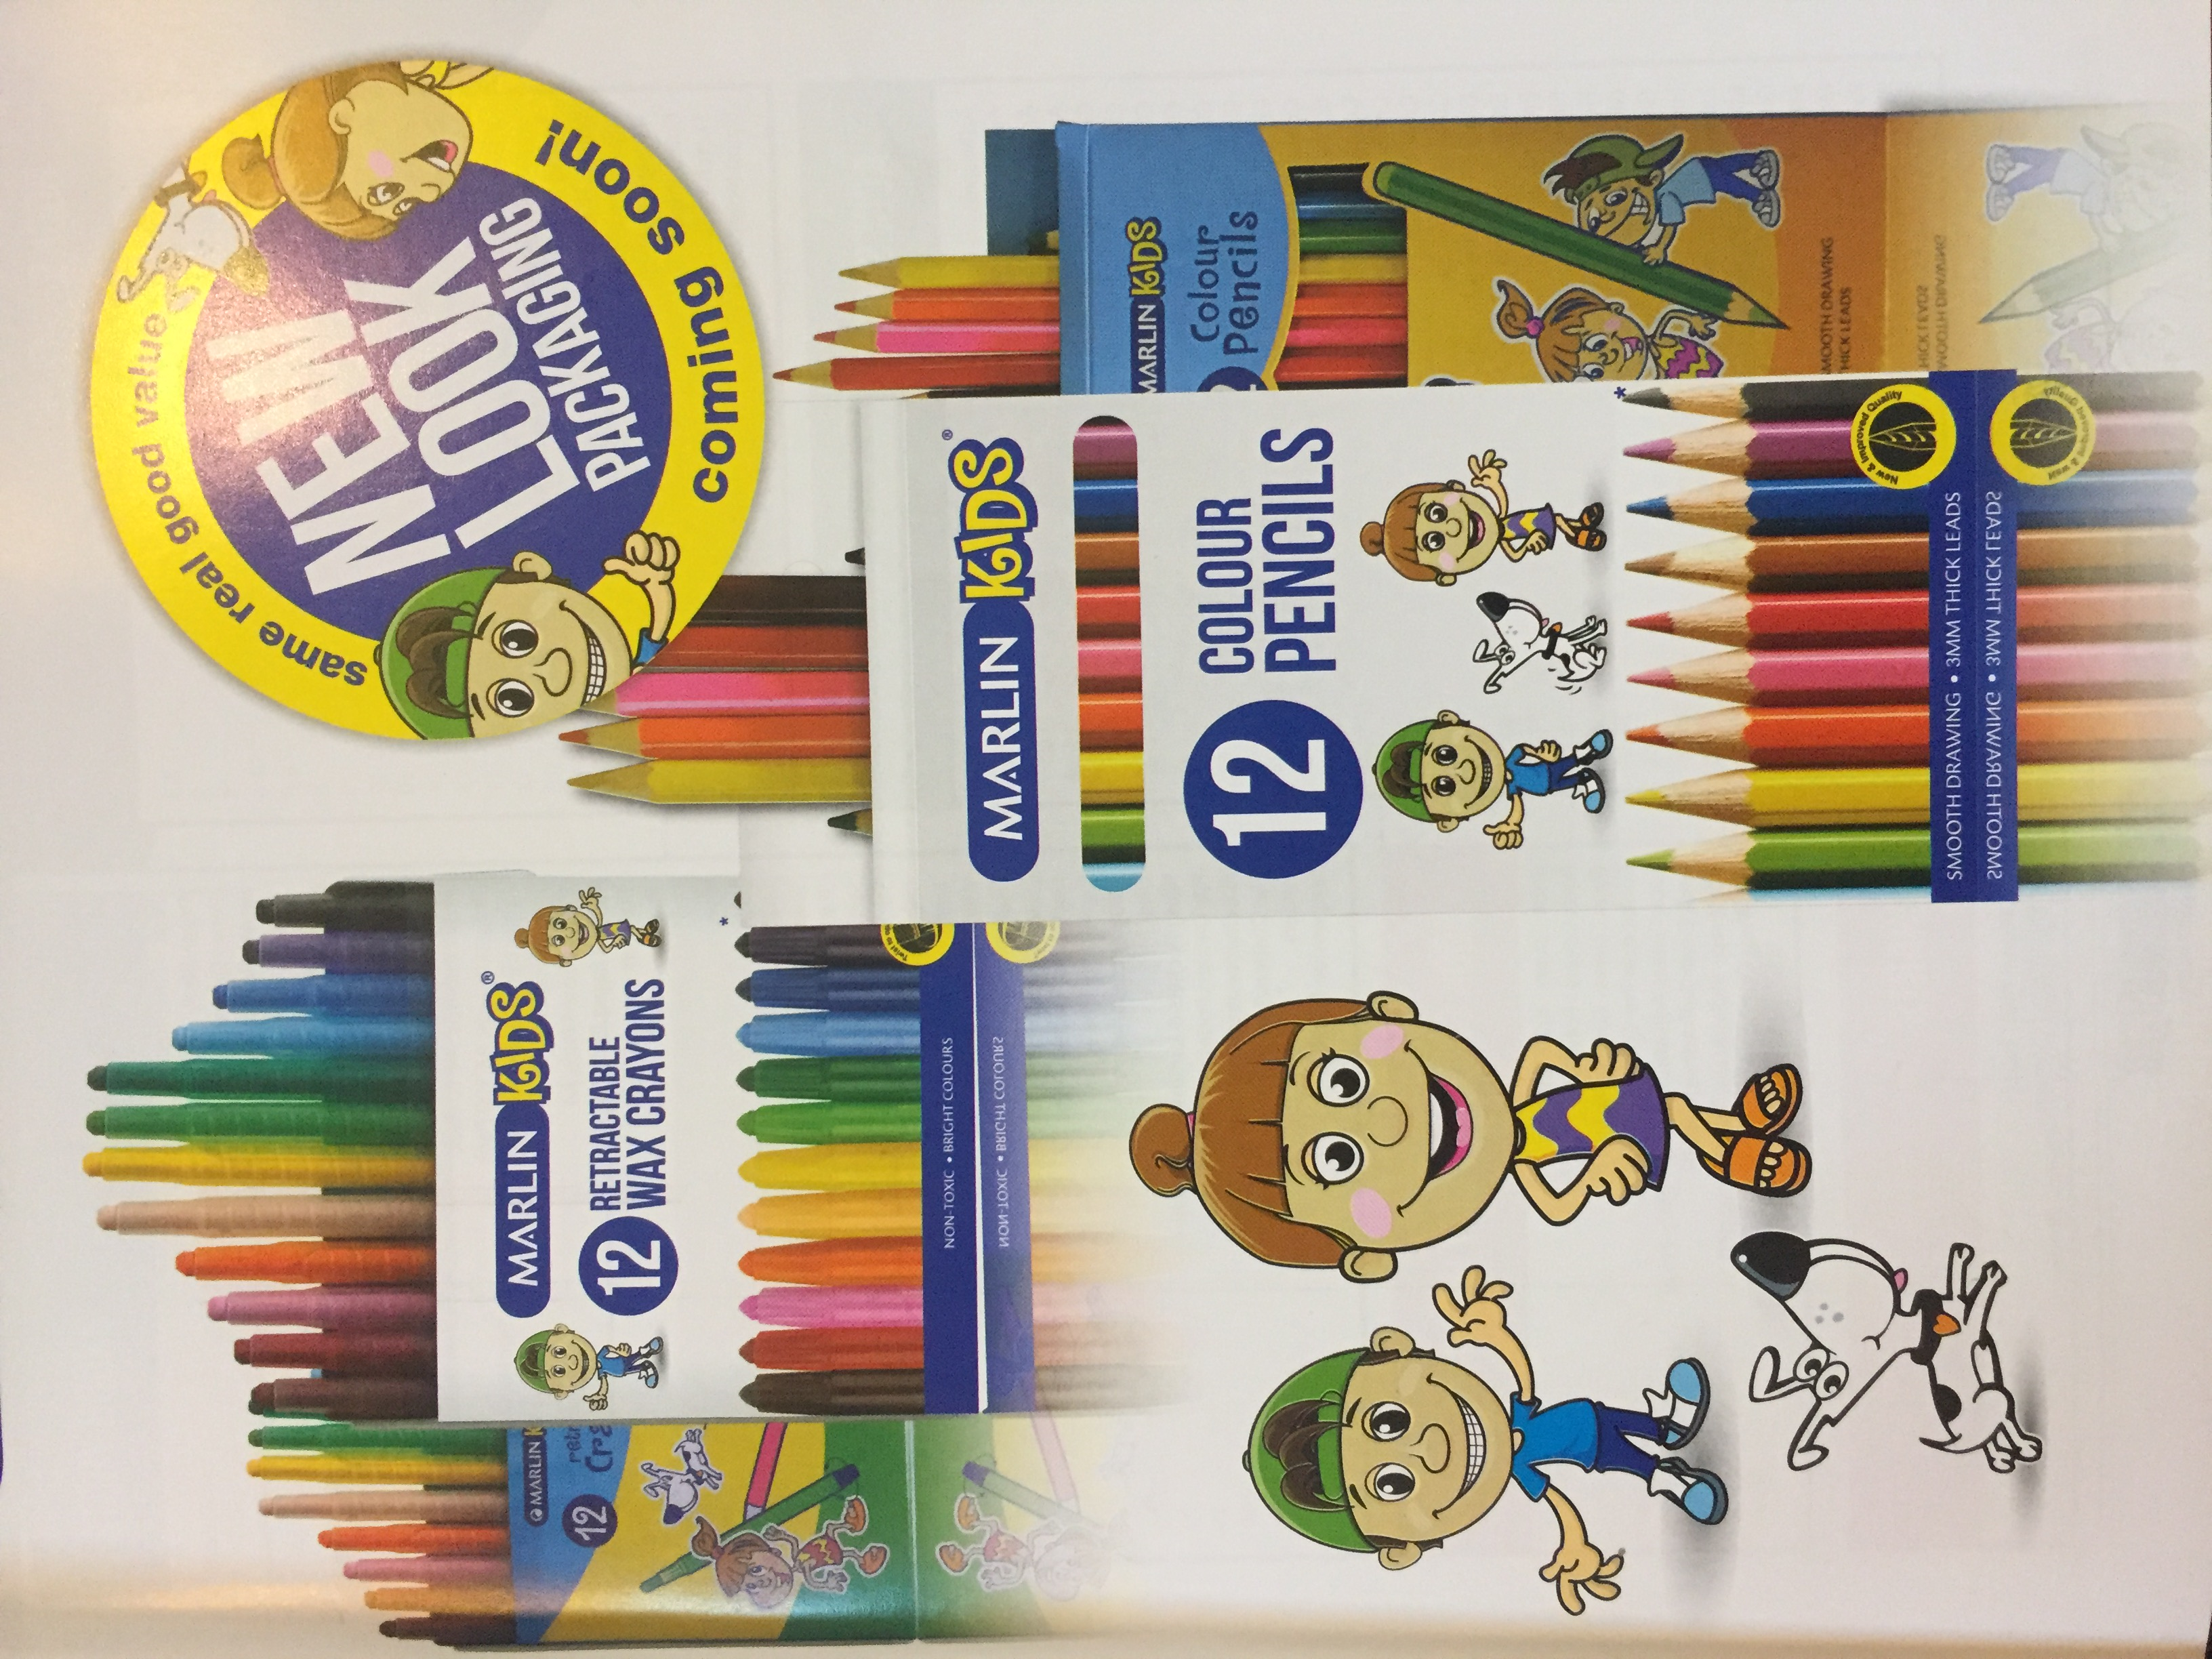 Colouring pencils and crayons starting from 8rand 